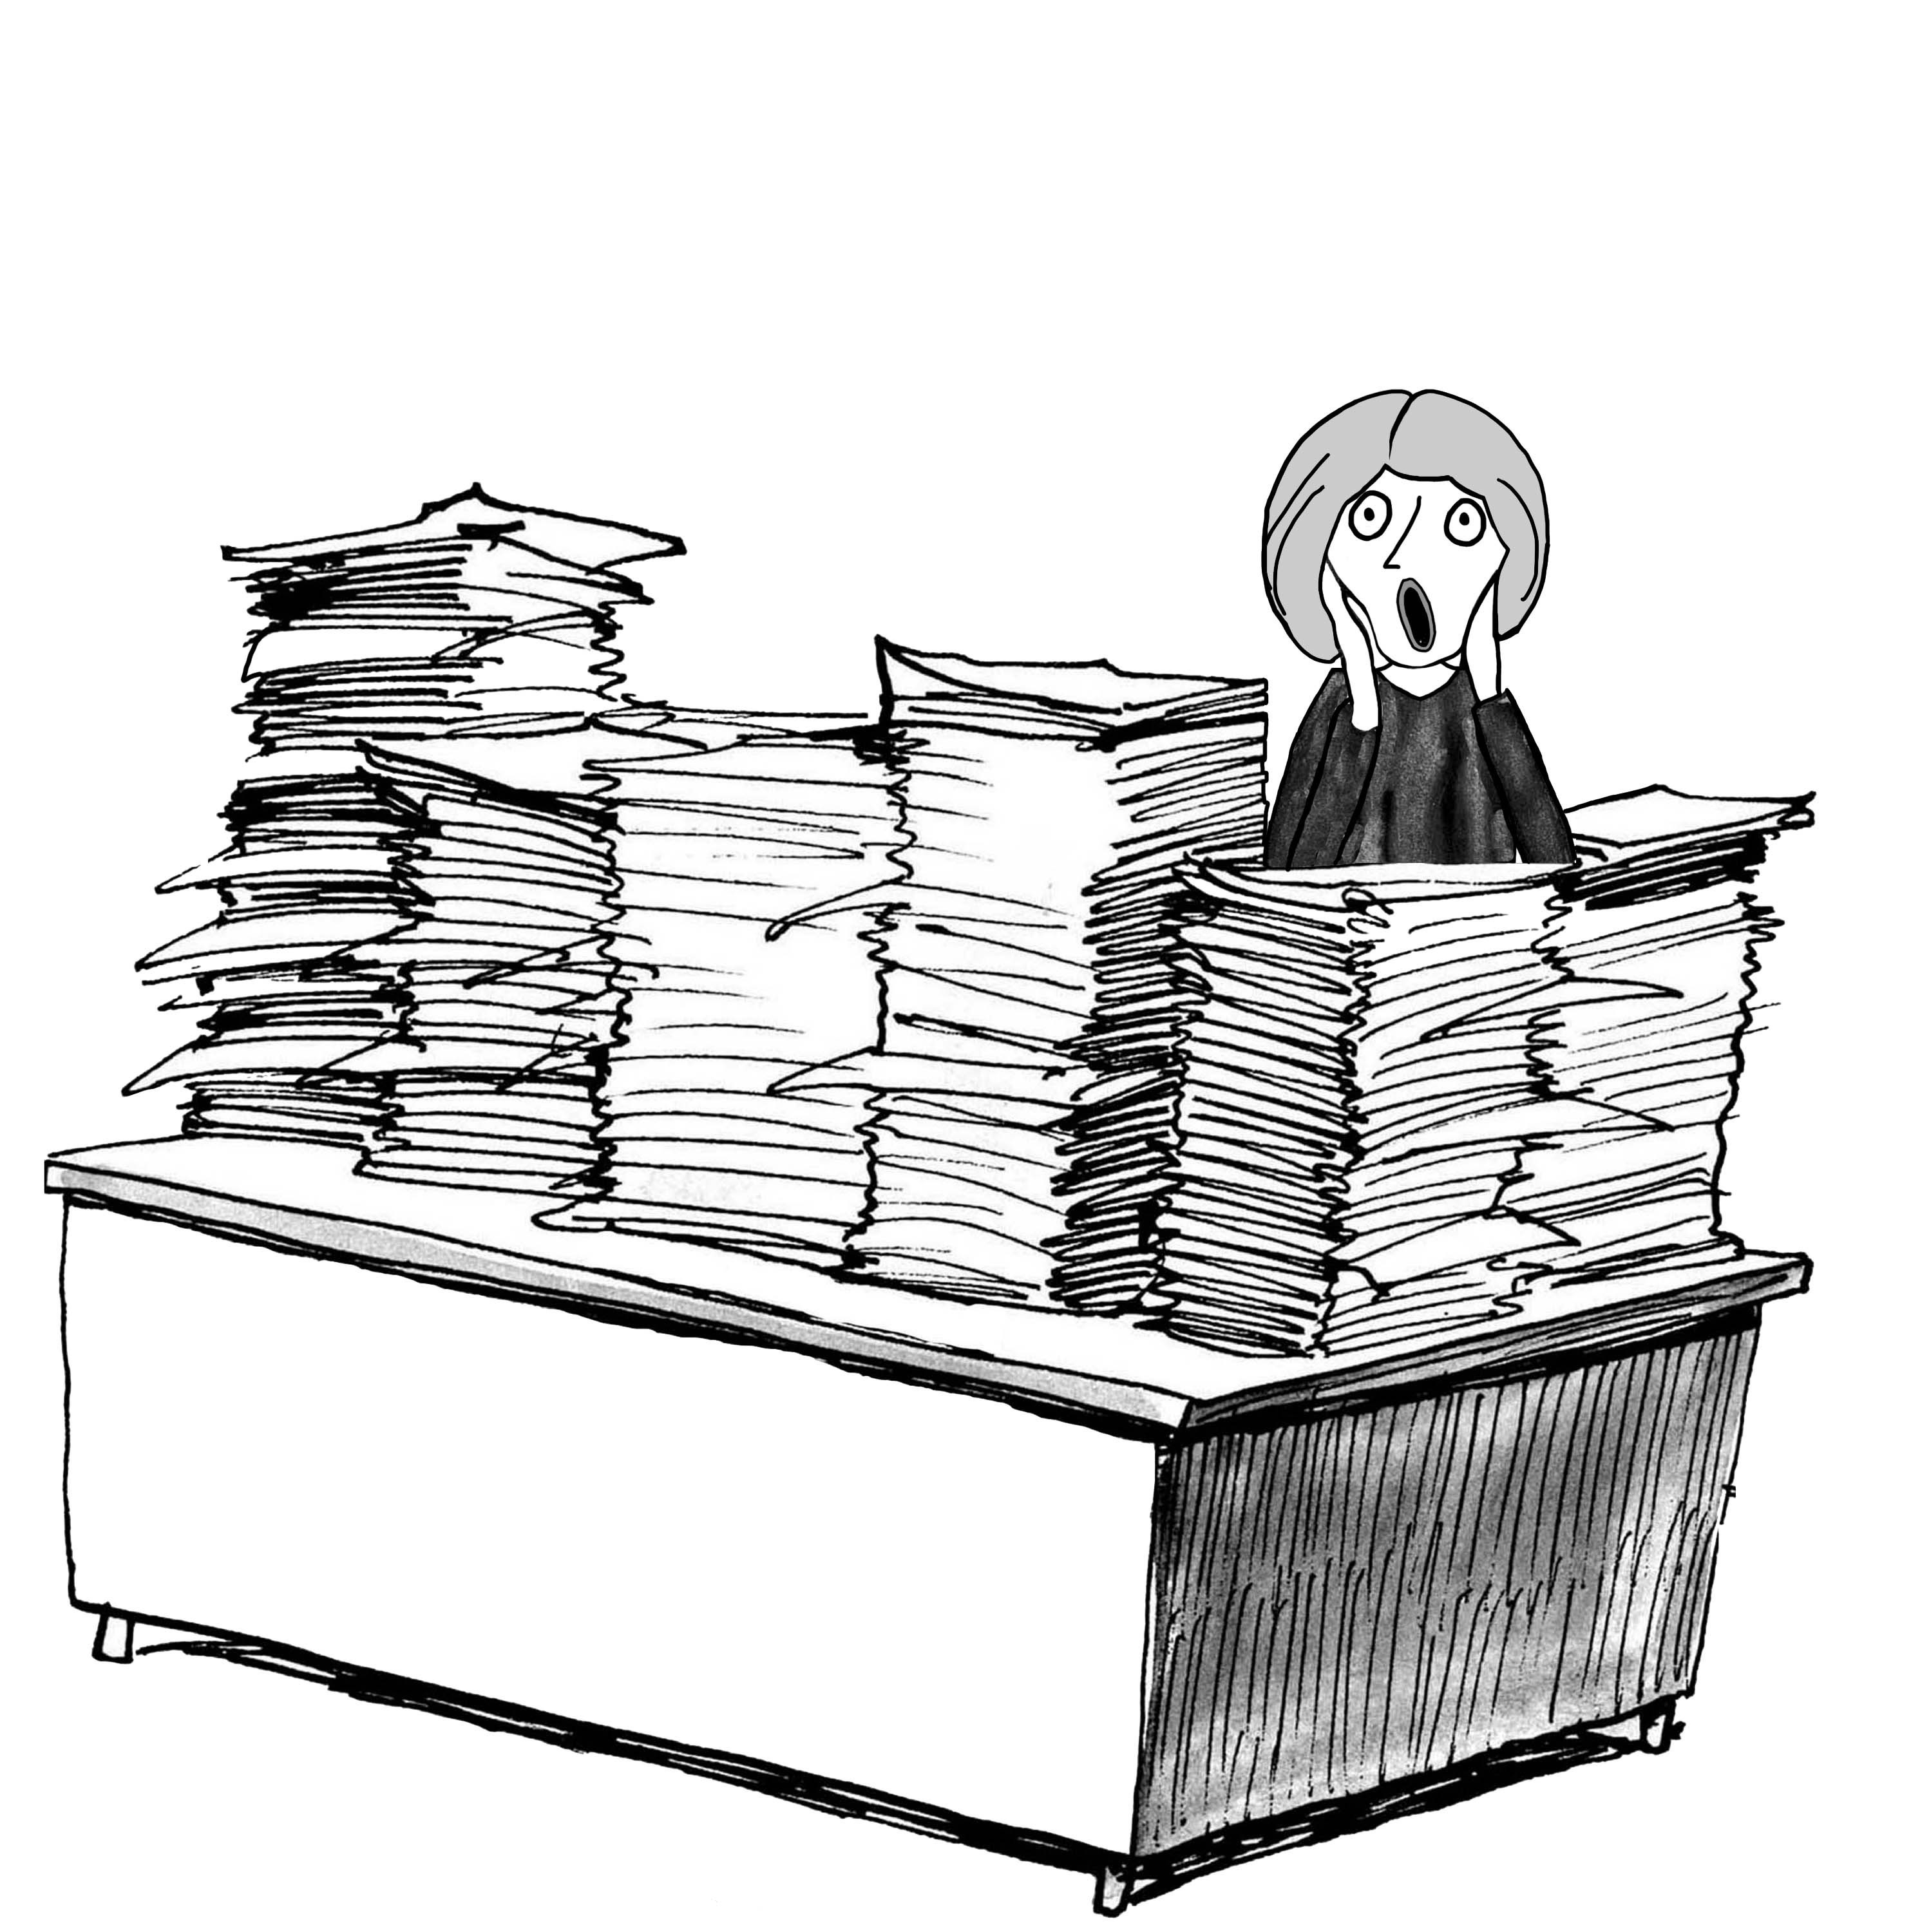 Desk filled with paper